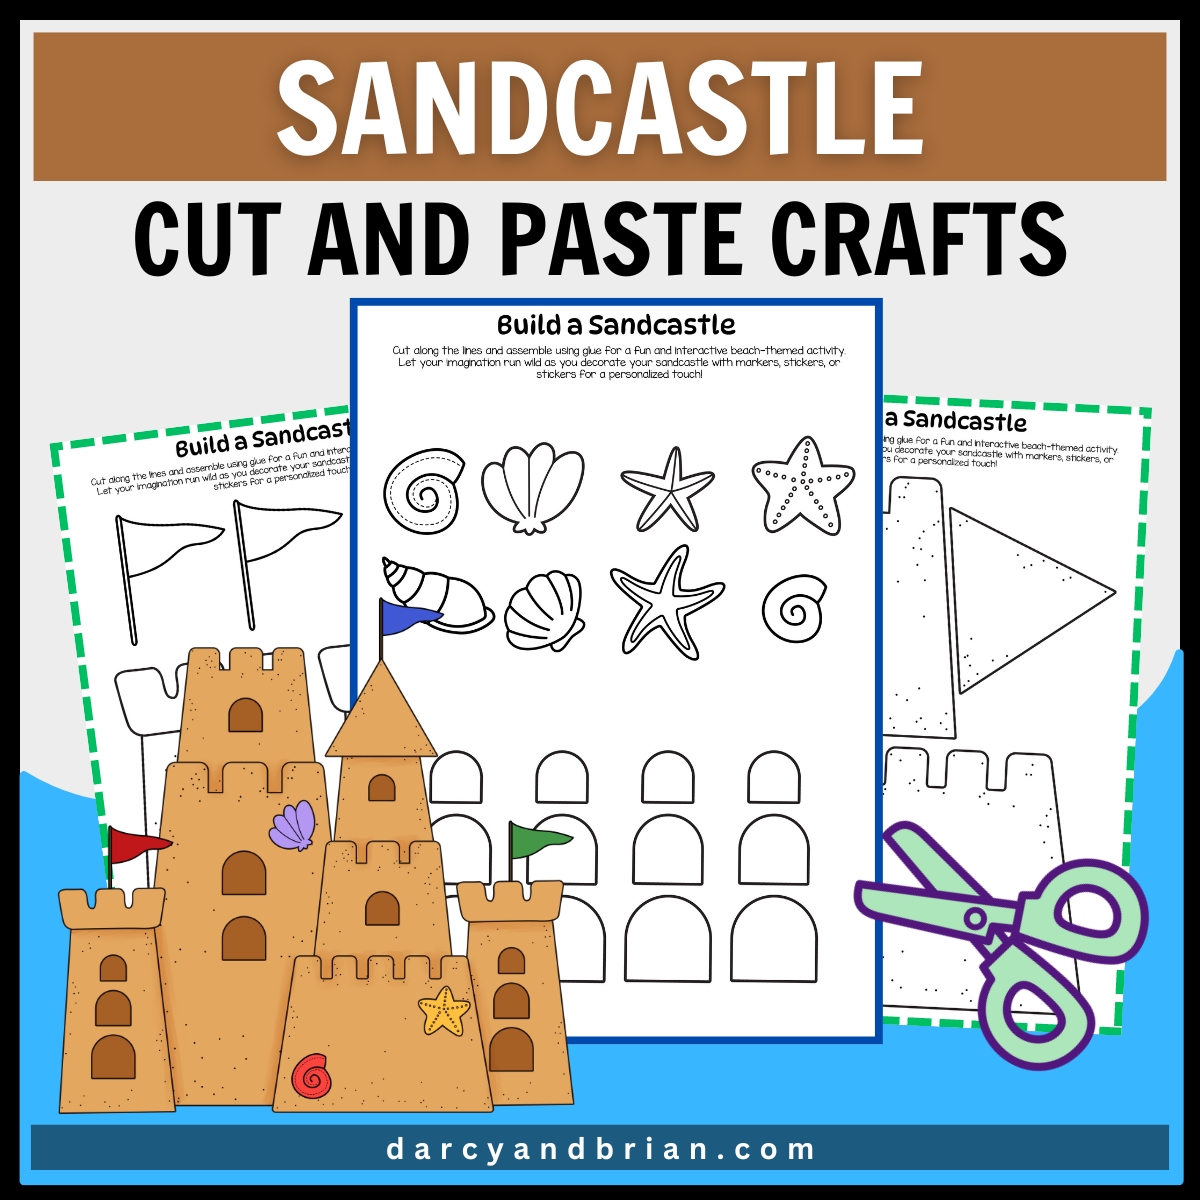 Sandcastle Cut and Paste Craft